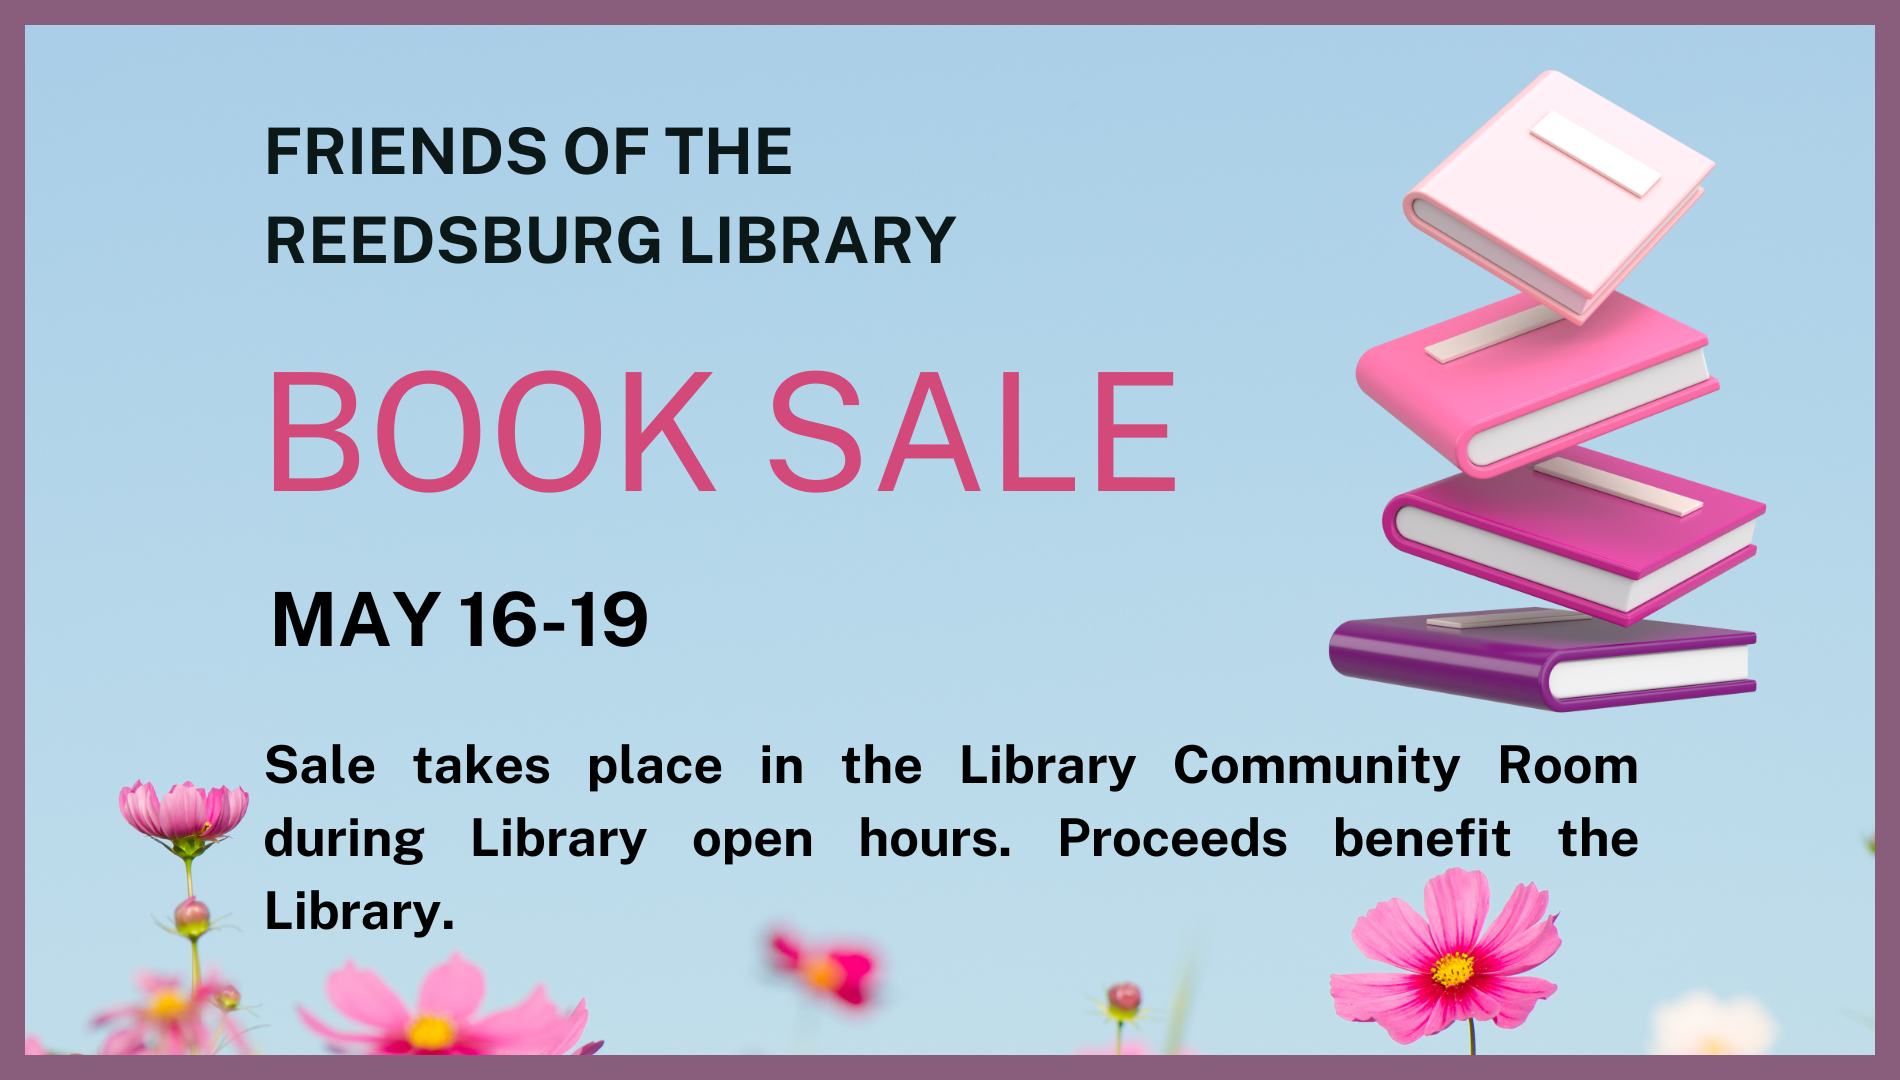 Friends of the Library Book Sale